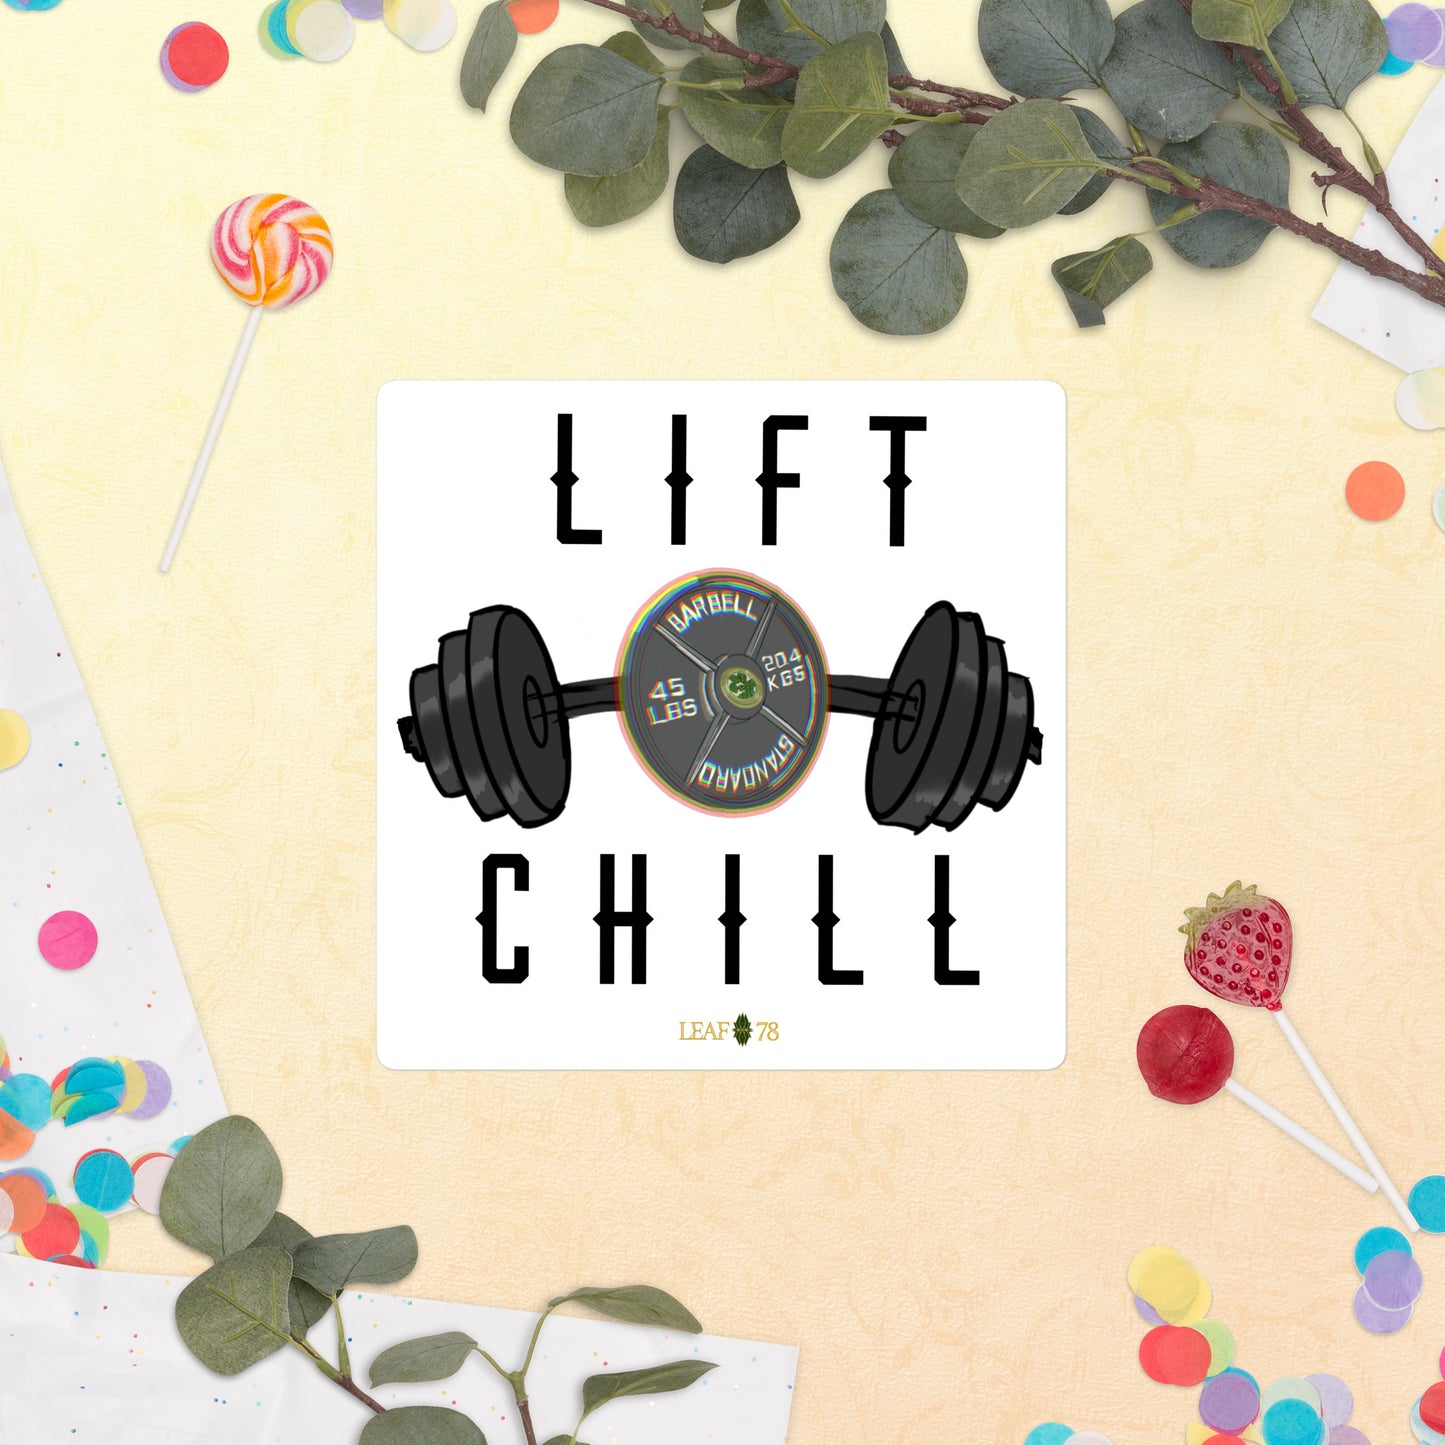 Lift n' Chill Bubble-free stickers